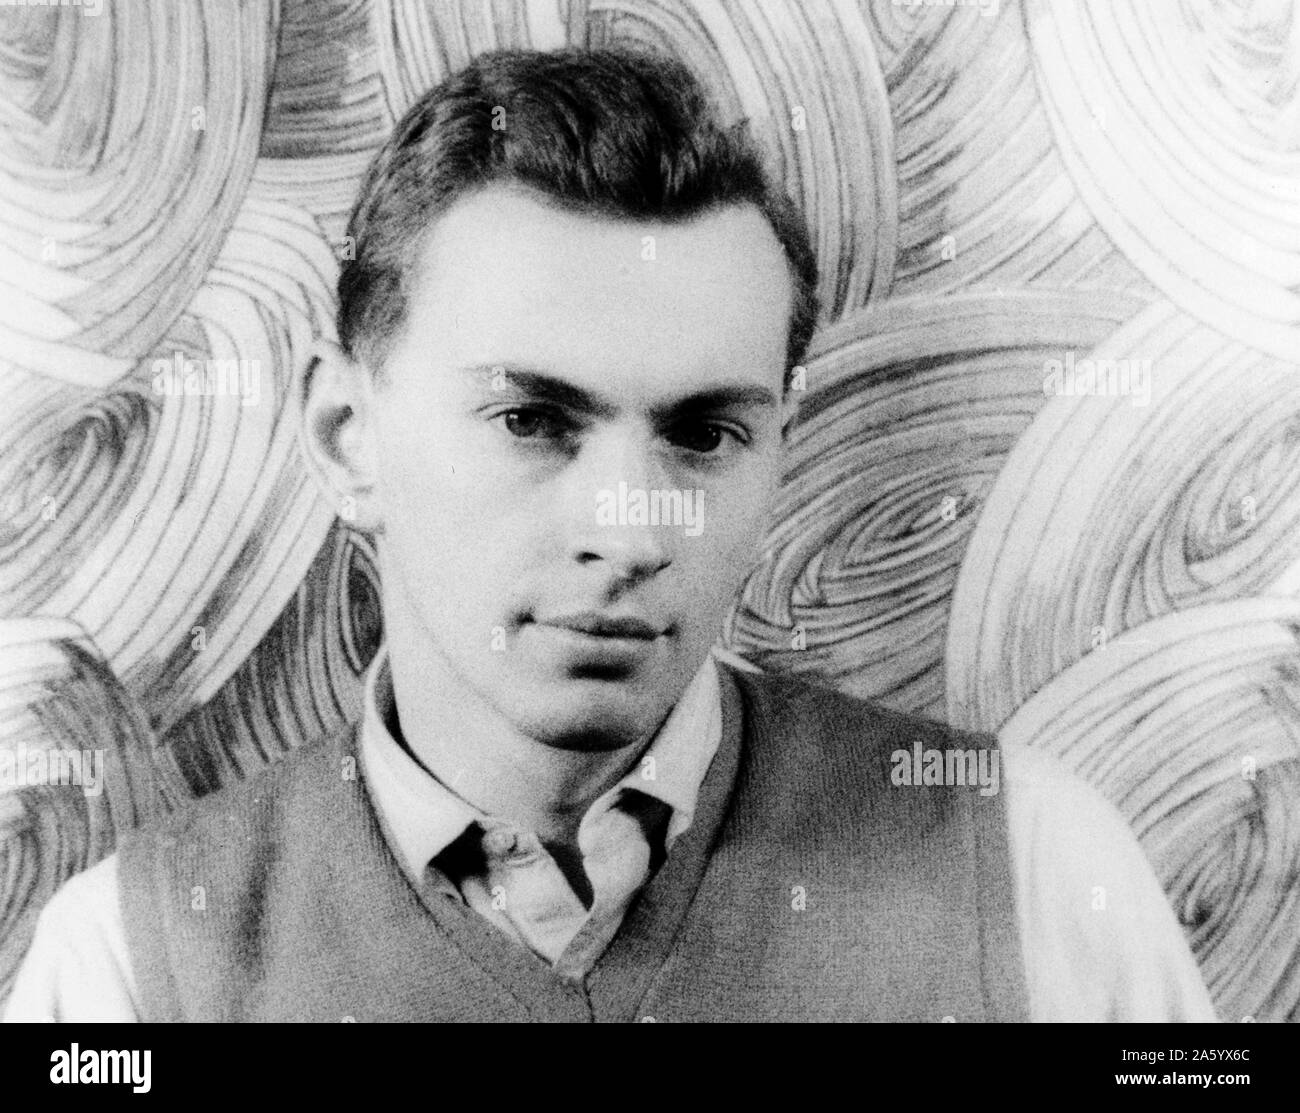 Gore Vidal (1925 – 2012) American writer (novels, essays, screenplays, stage plays) and a public intellectual known for his patrician manner, epigrammatic wit, and polished style of writing Stock Photo